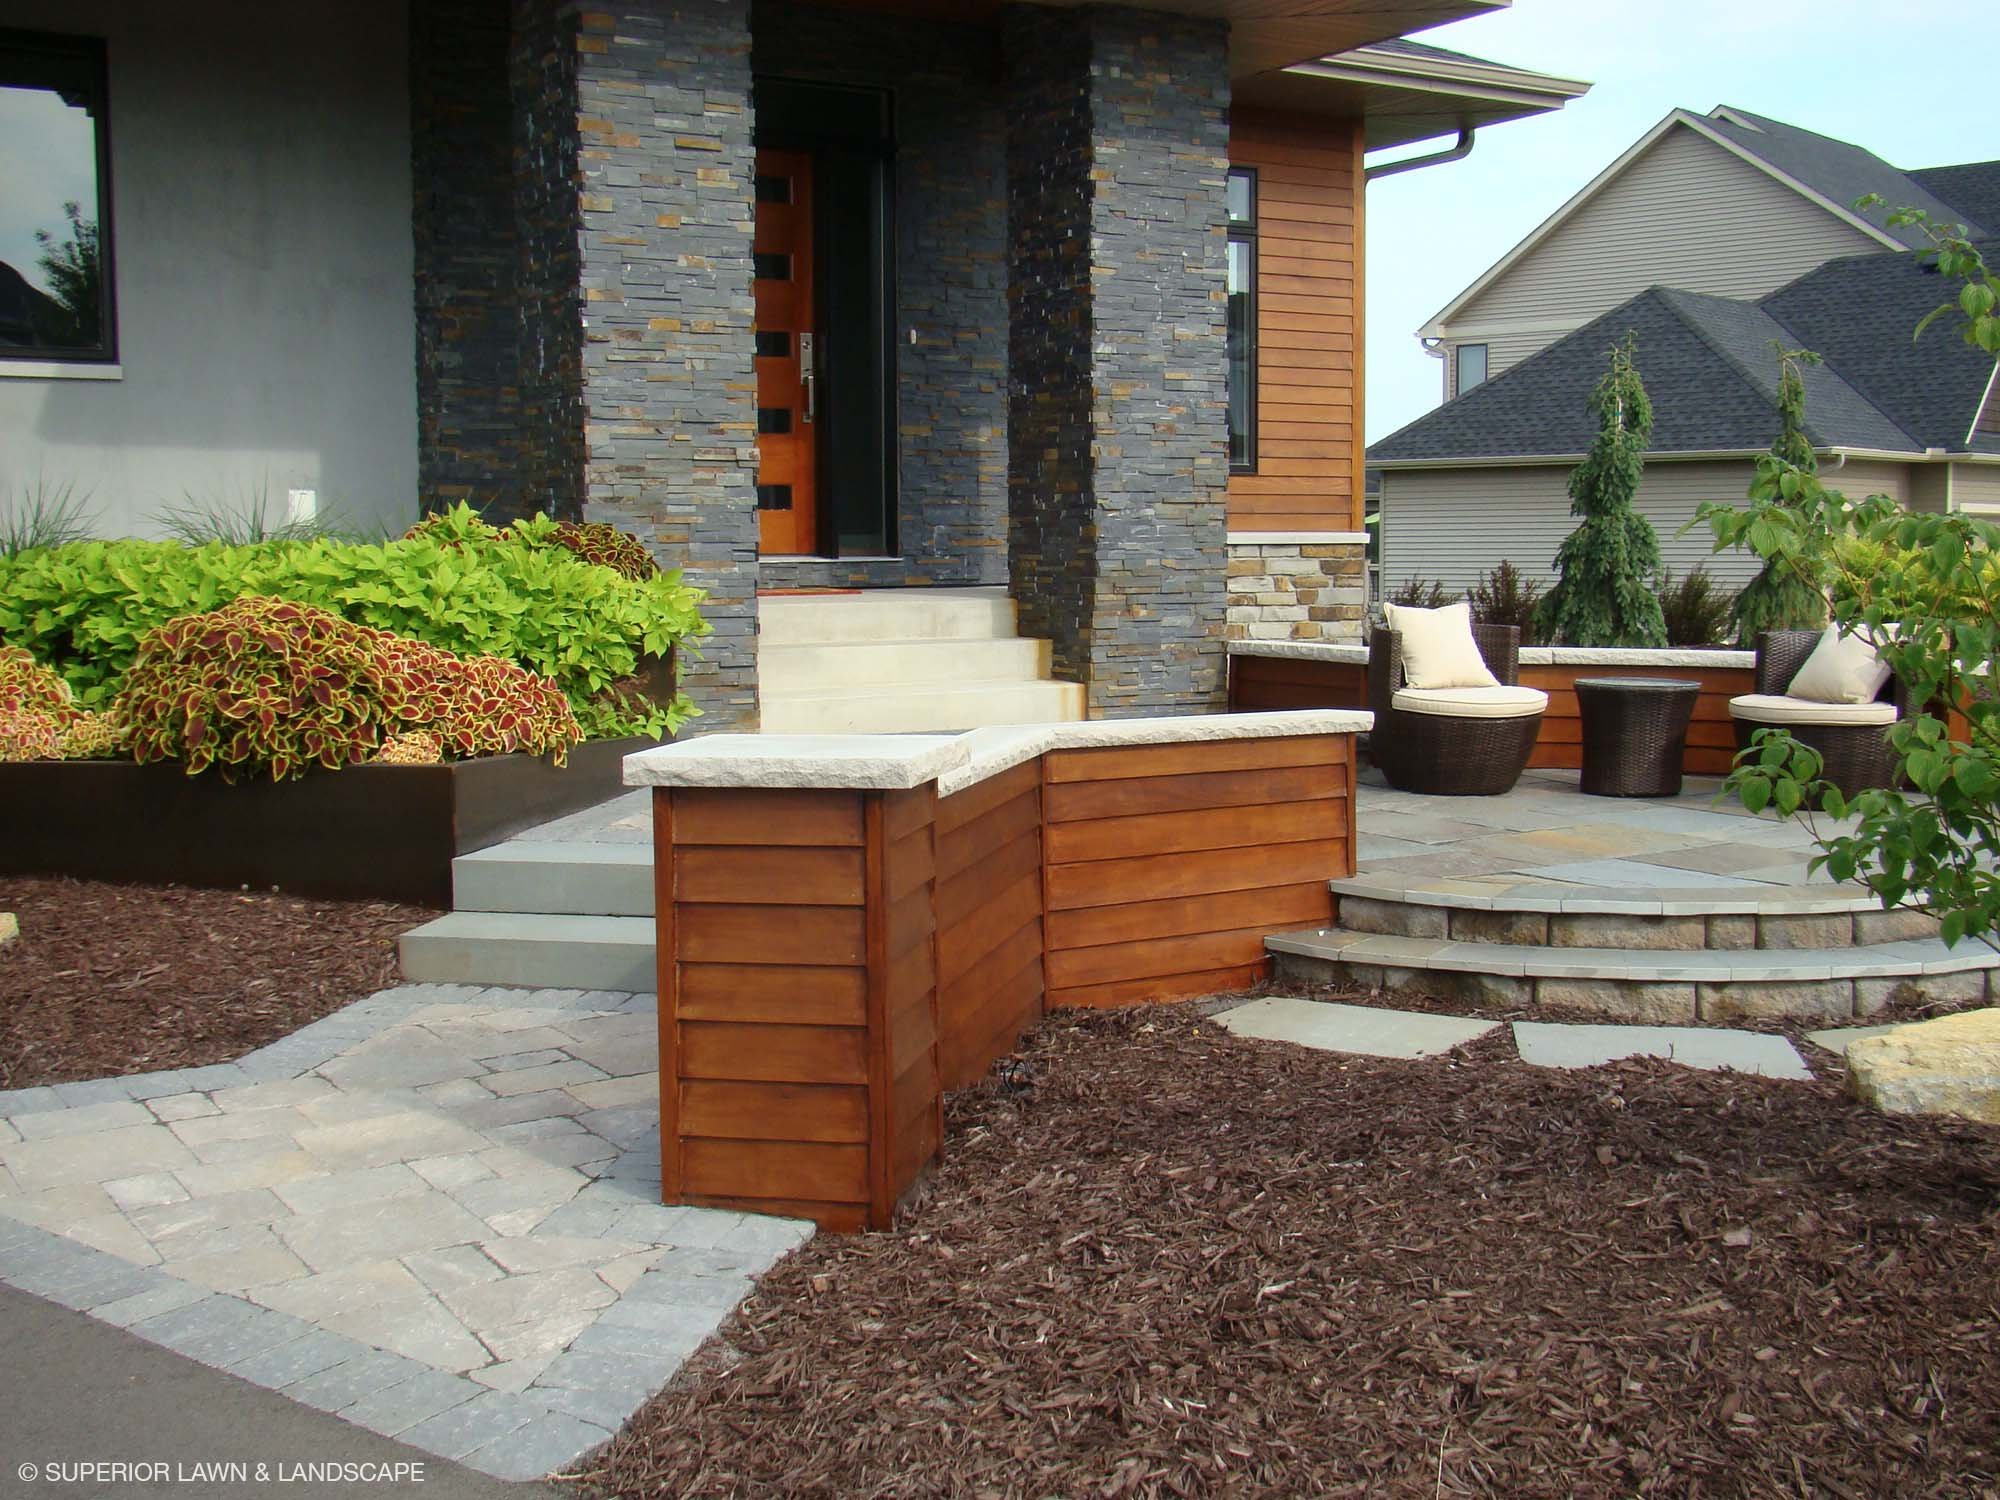 superior-lawn-landscape-front-entryways-022-modern-deco-stone-and-wood.jpg